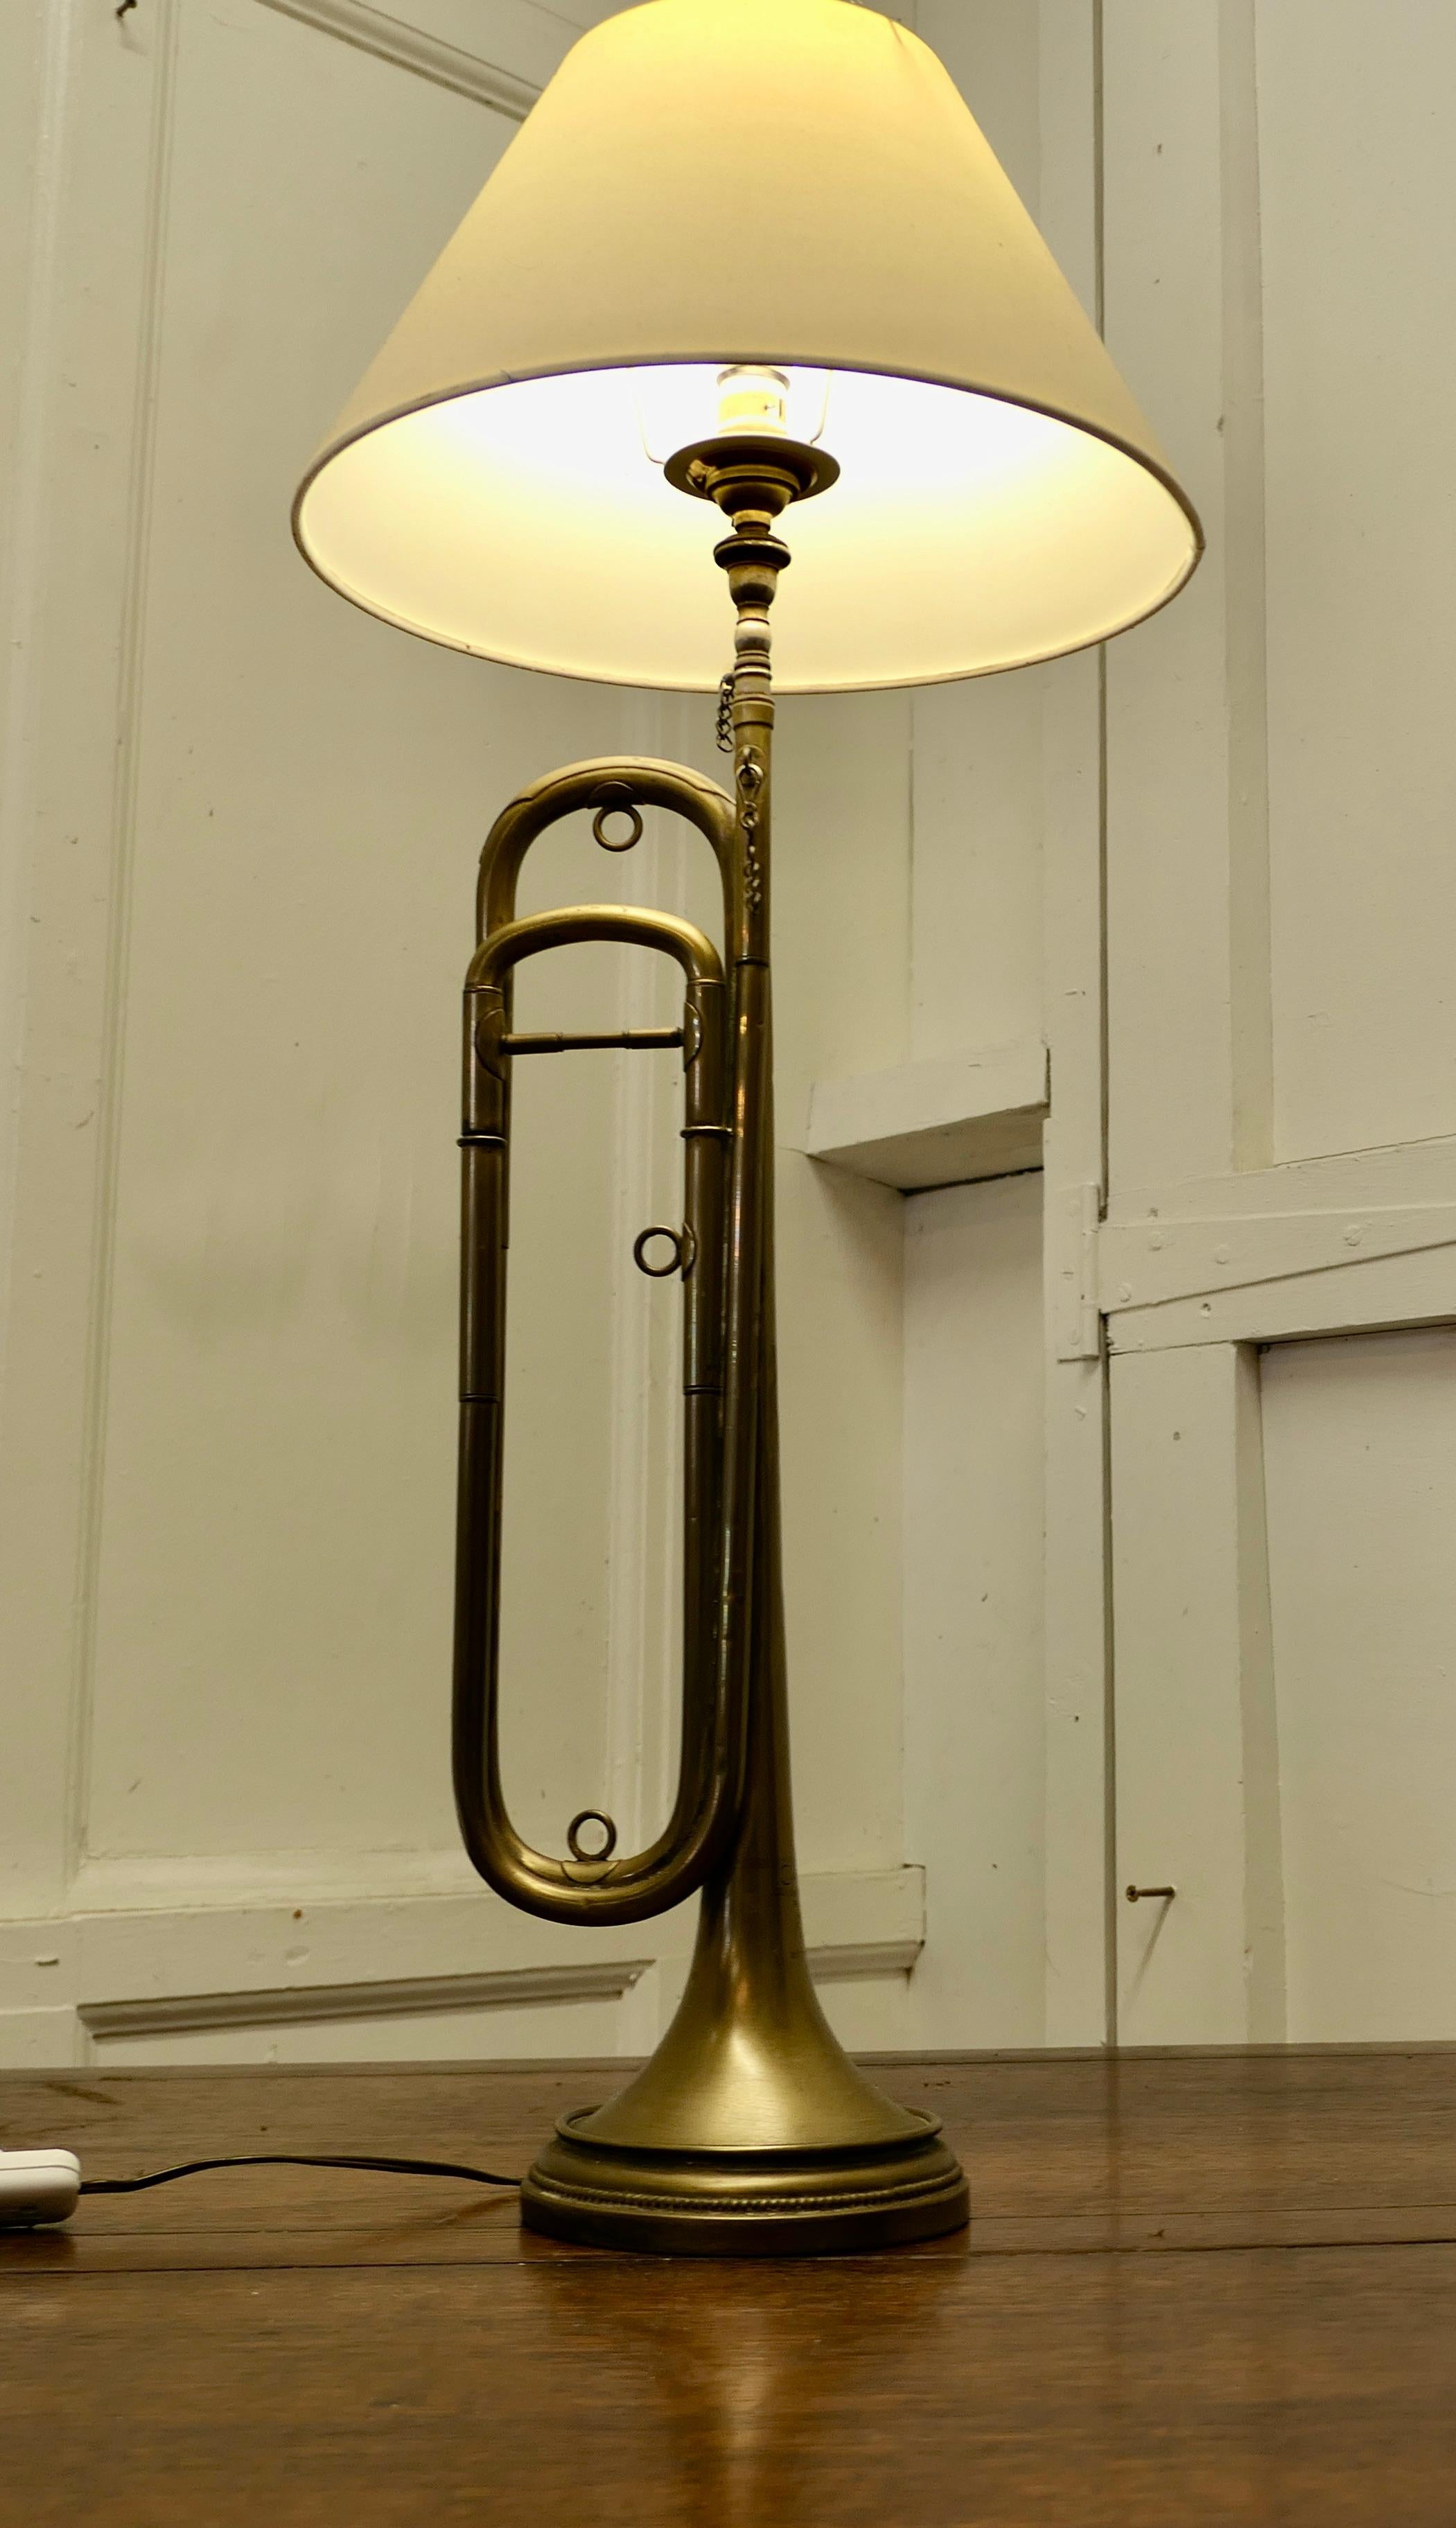 Quirky Brass table lamp made from a Trumpet

This would be great in a Musical or Jazz Club design setting
The Lamp is well balanced, it has been wired for electricity and has a parchment shade
The Lamp is 28” high, 12” in diameter (shade) 8”